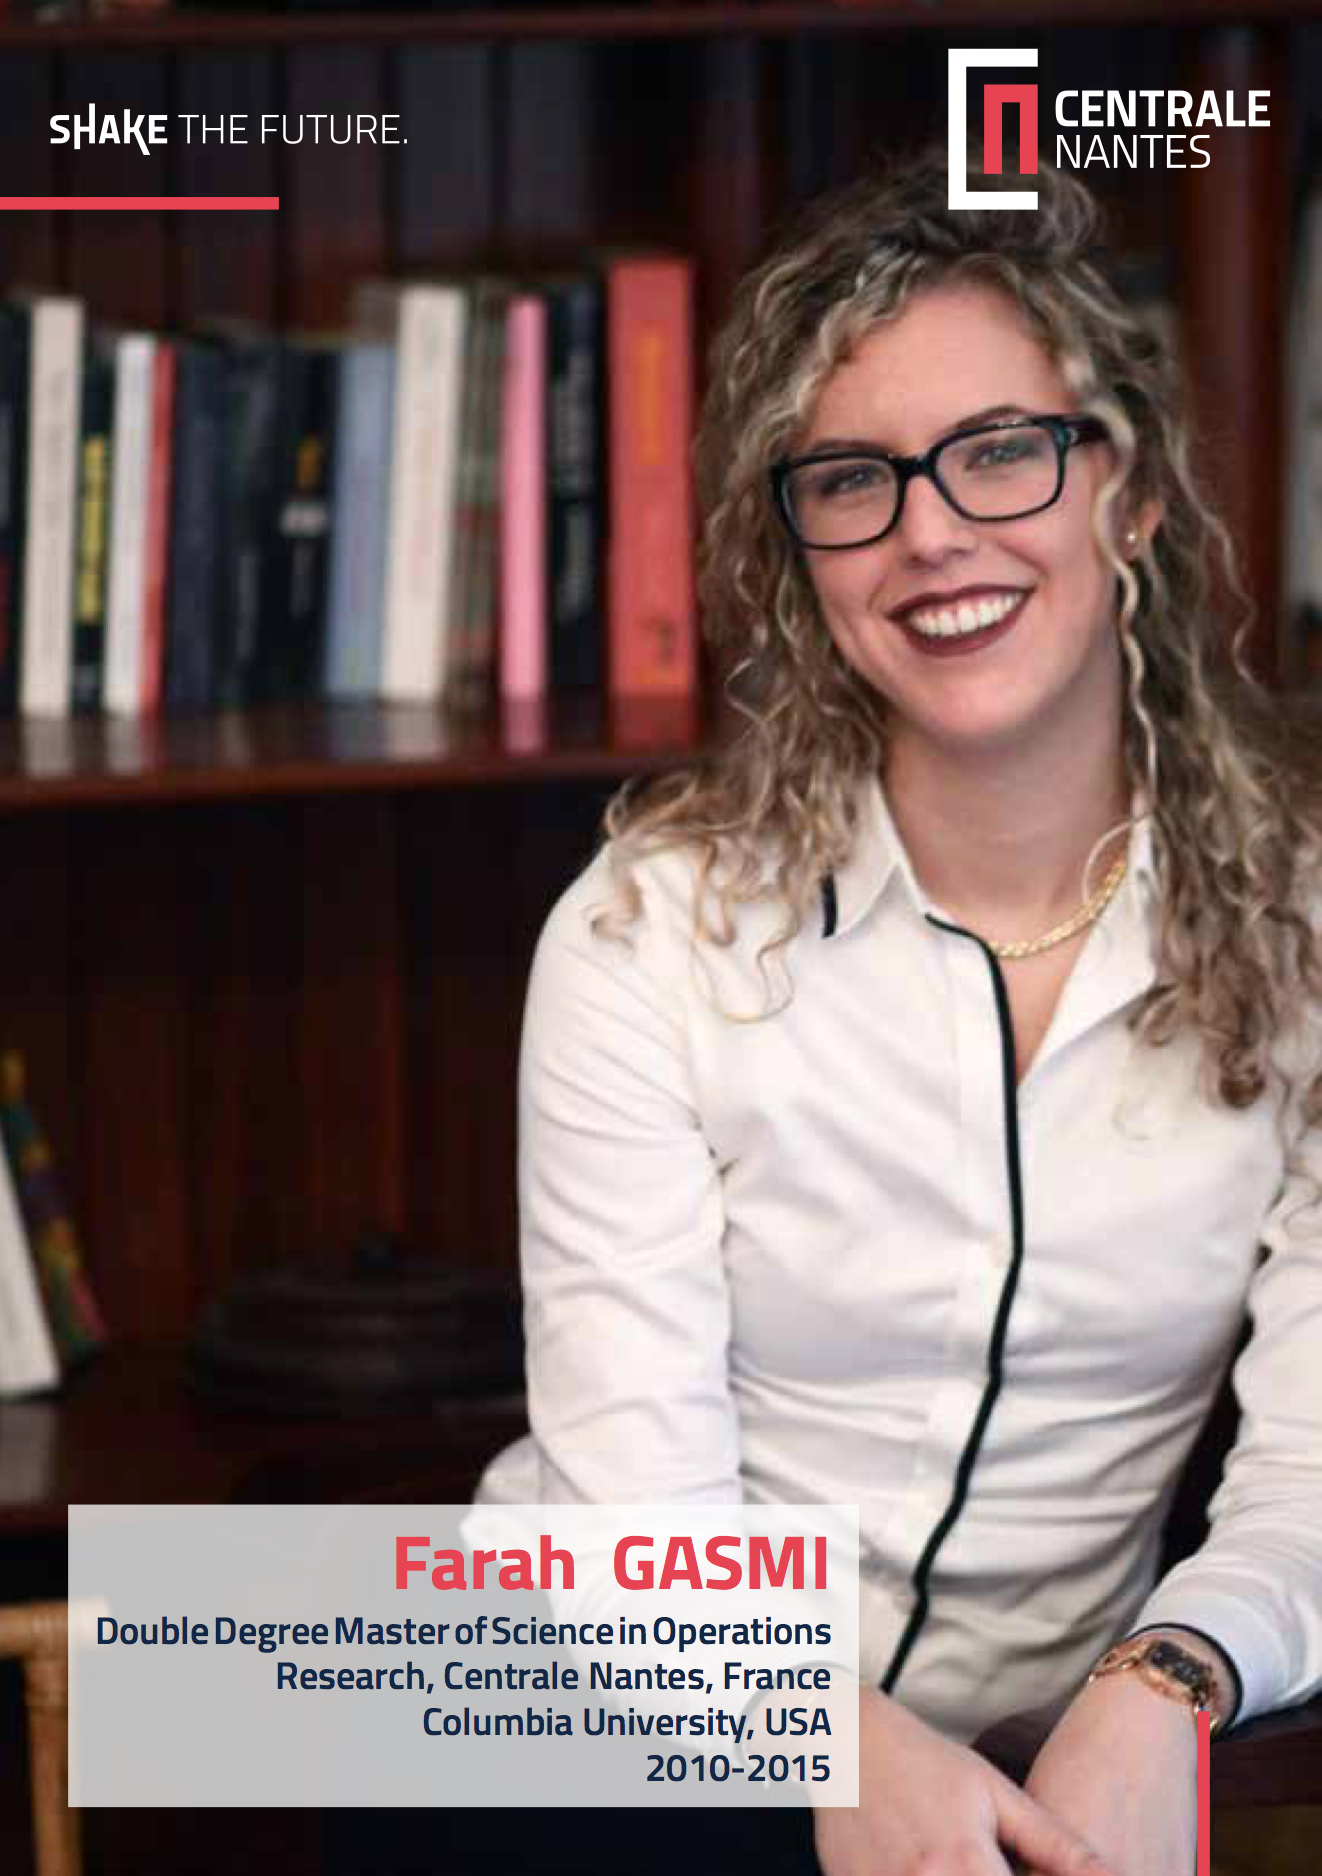 Farah Gasmi, Deouble Degree Master of Science in Operations Research, Centrale Nantes, France, Columbia University, USA, 2010-2015